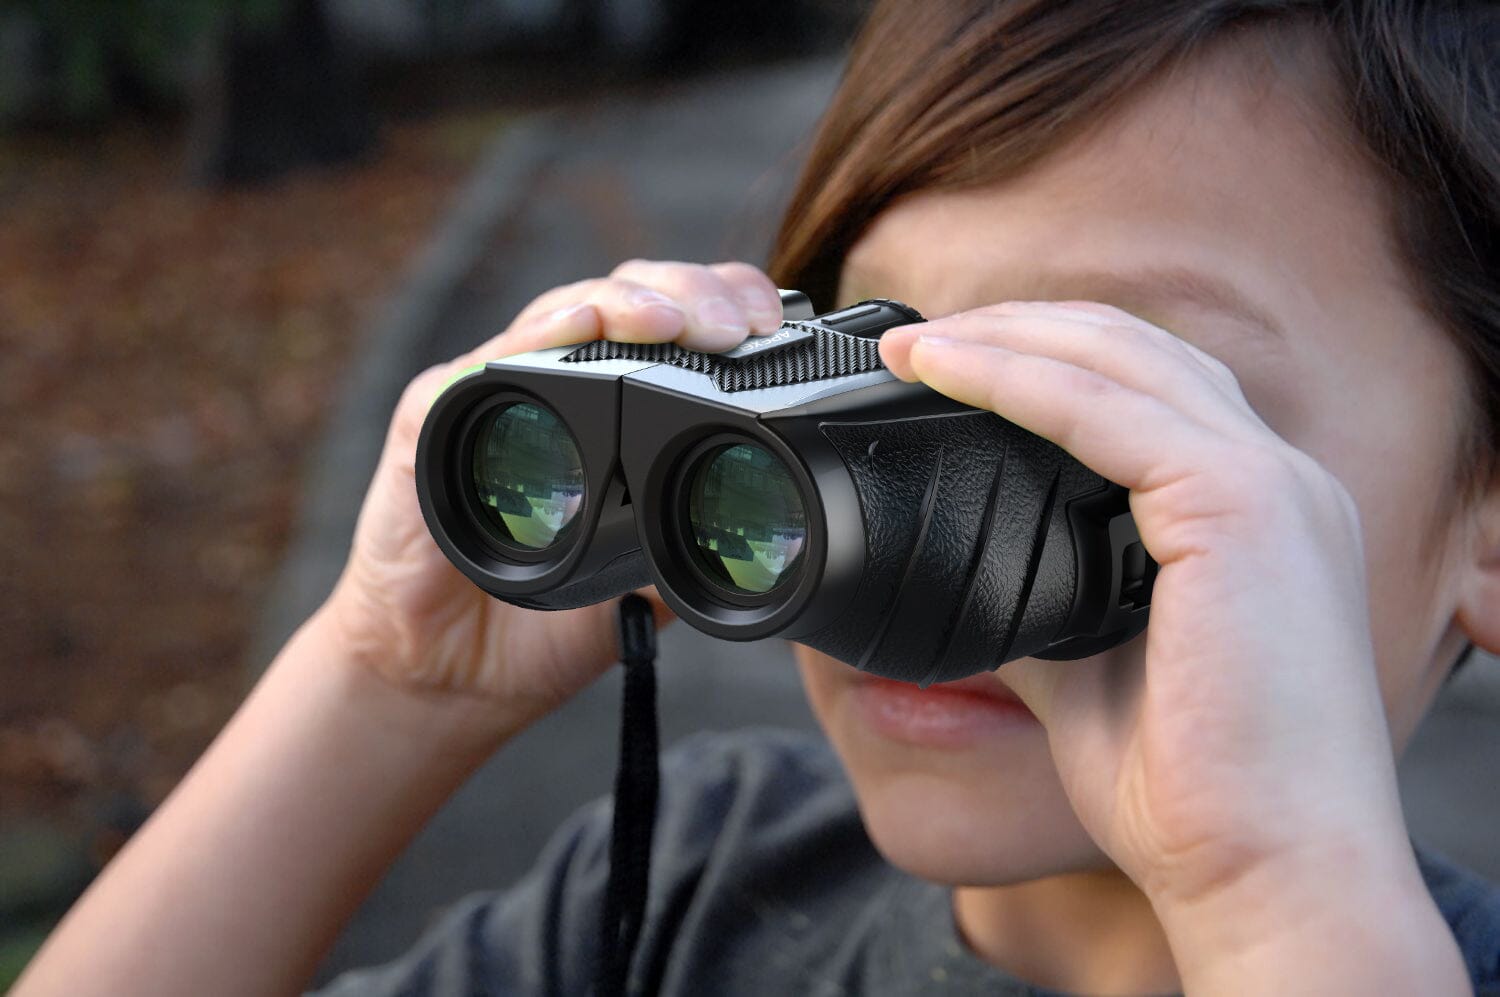 What should I pay attention to when buying binoculars?